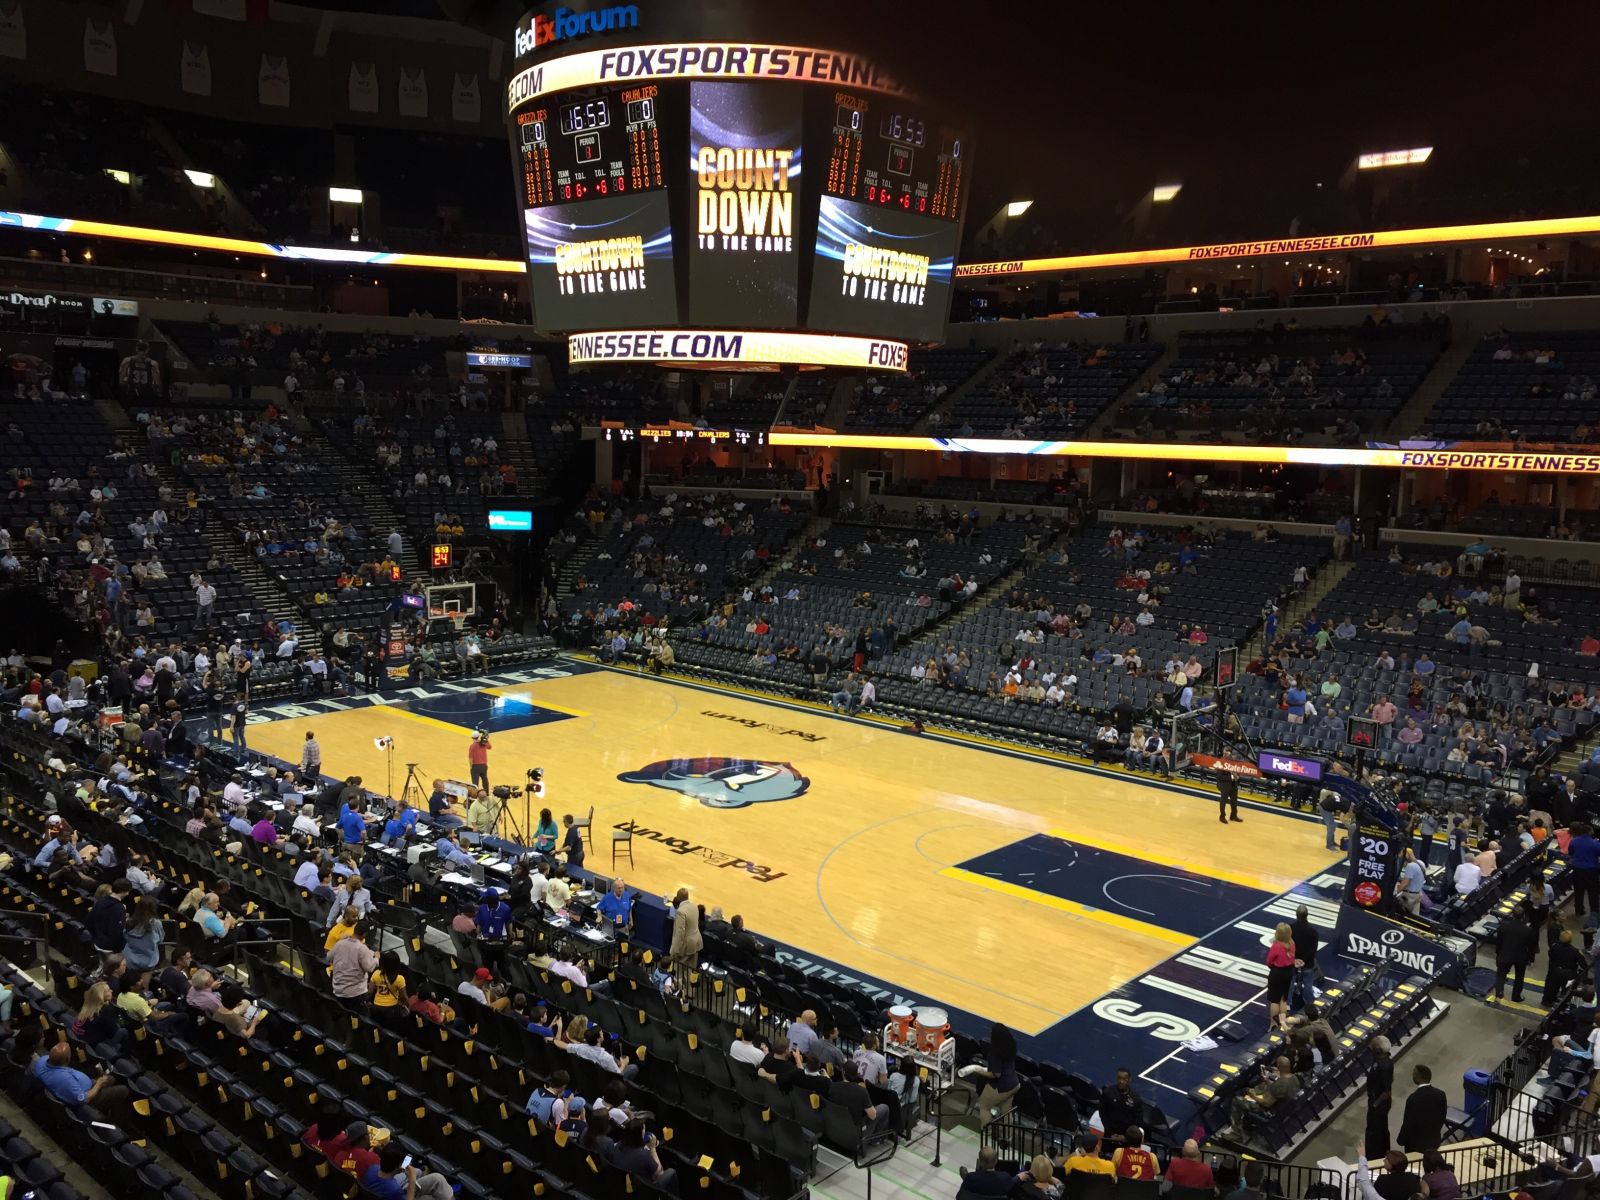 section 107a, row aa seat view  for basketball - fedex forum